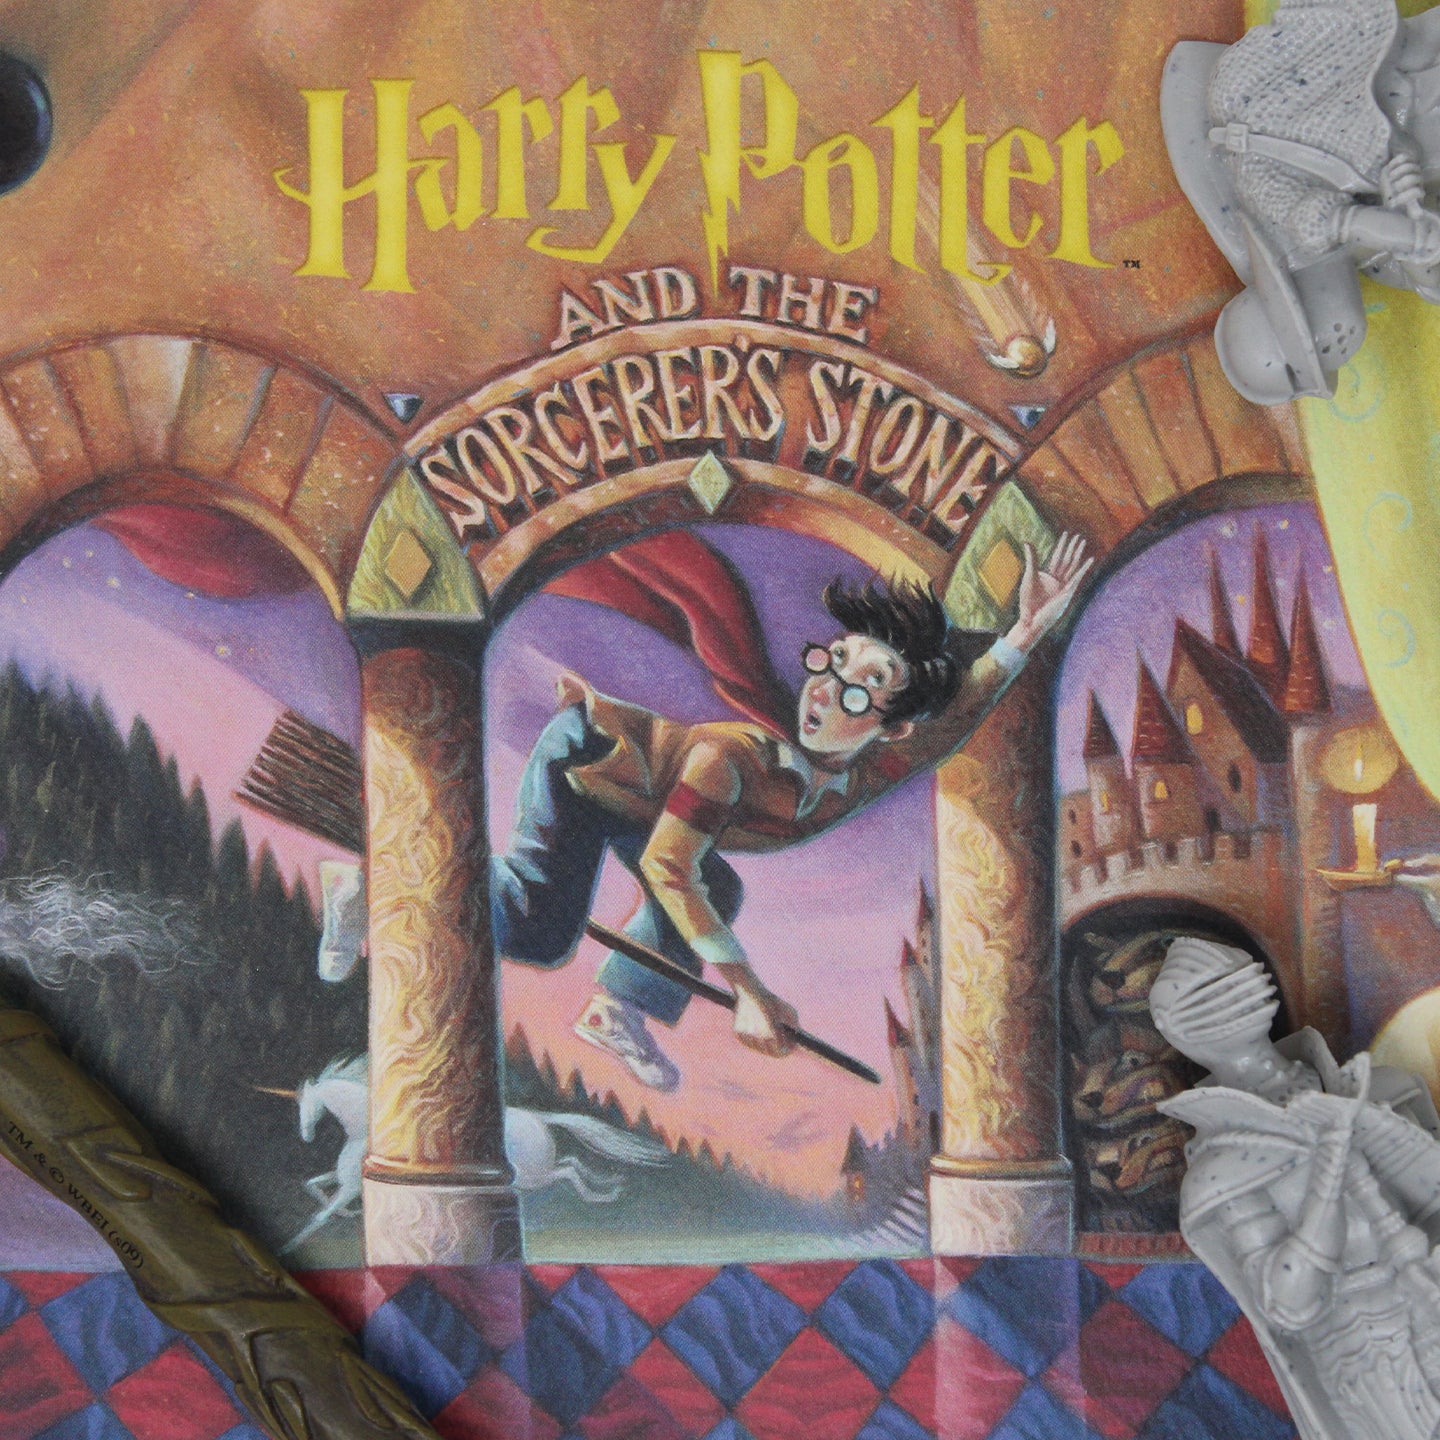 Harry Potter & the Philosopher's Stone Book Cover Artwork Limited Edition Art Print